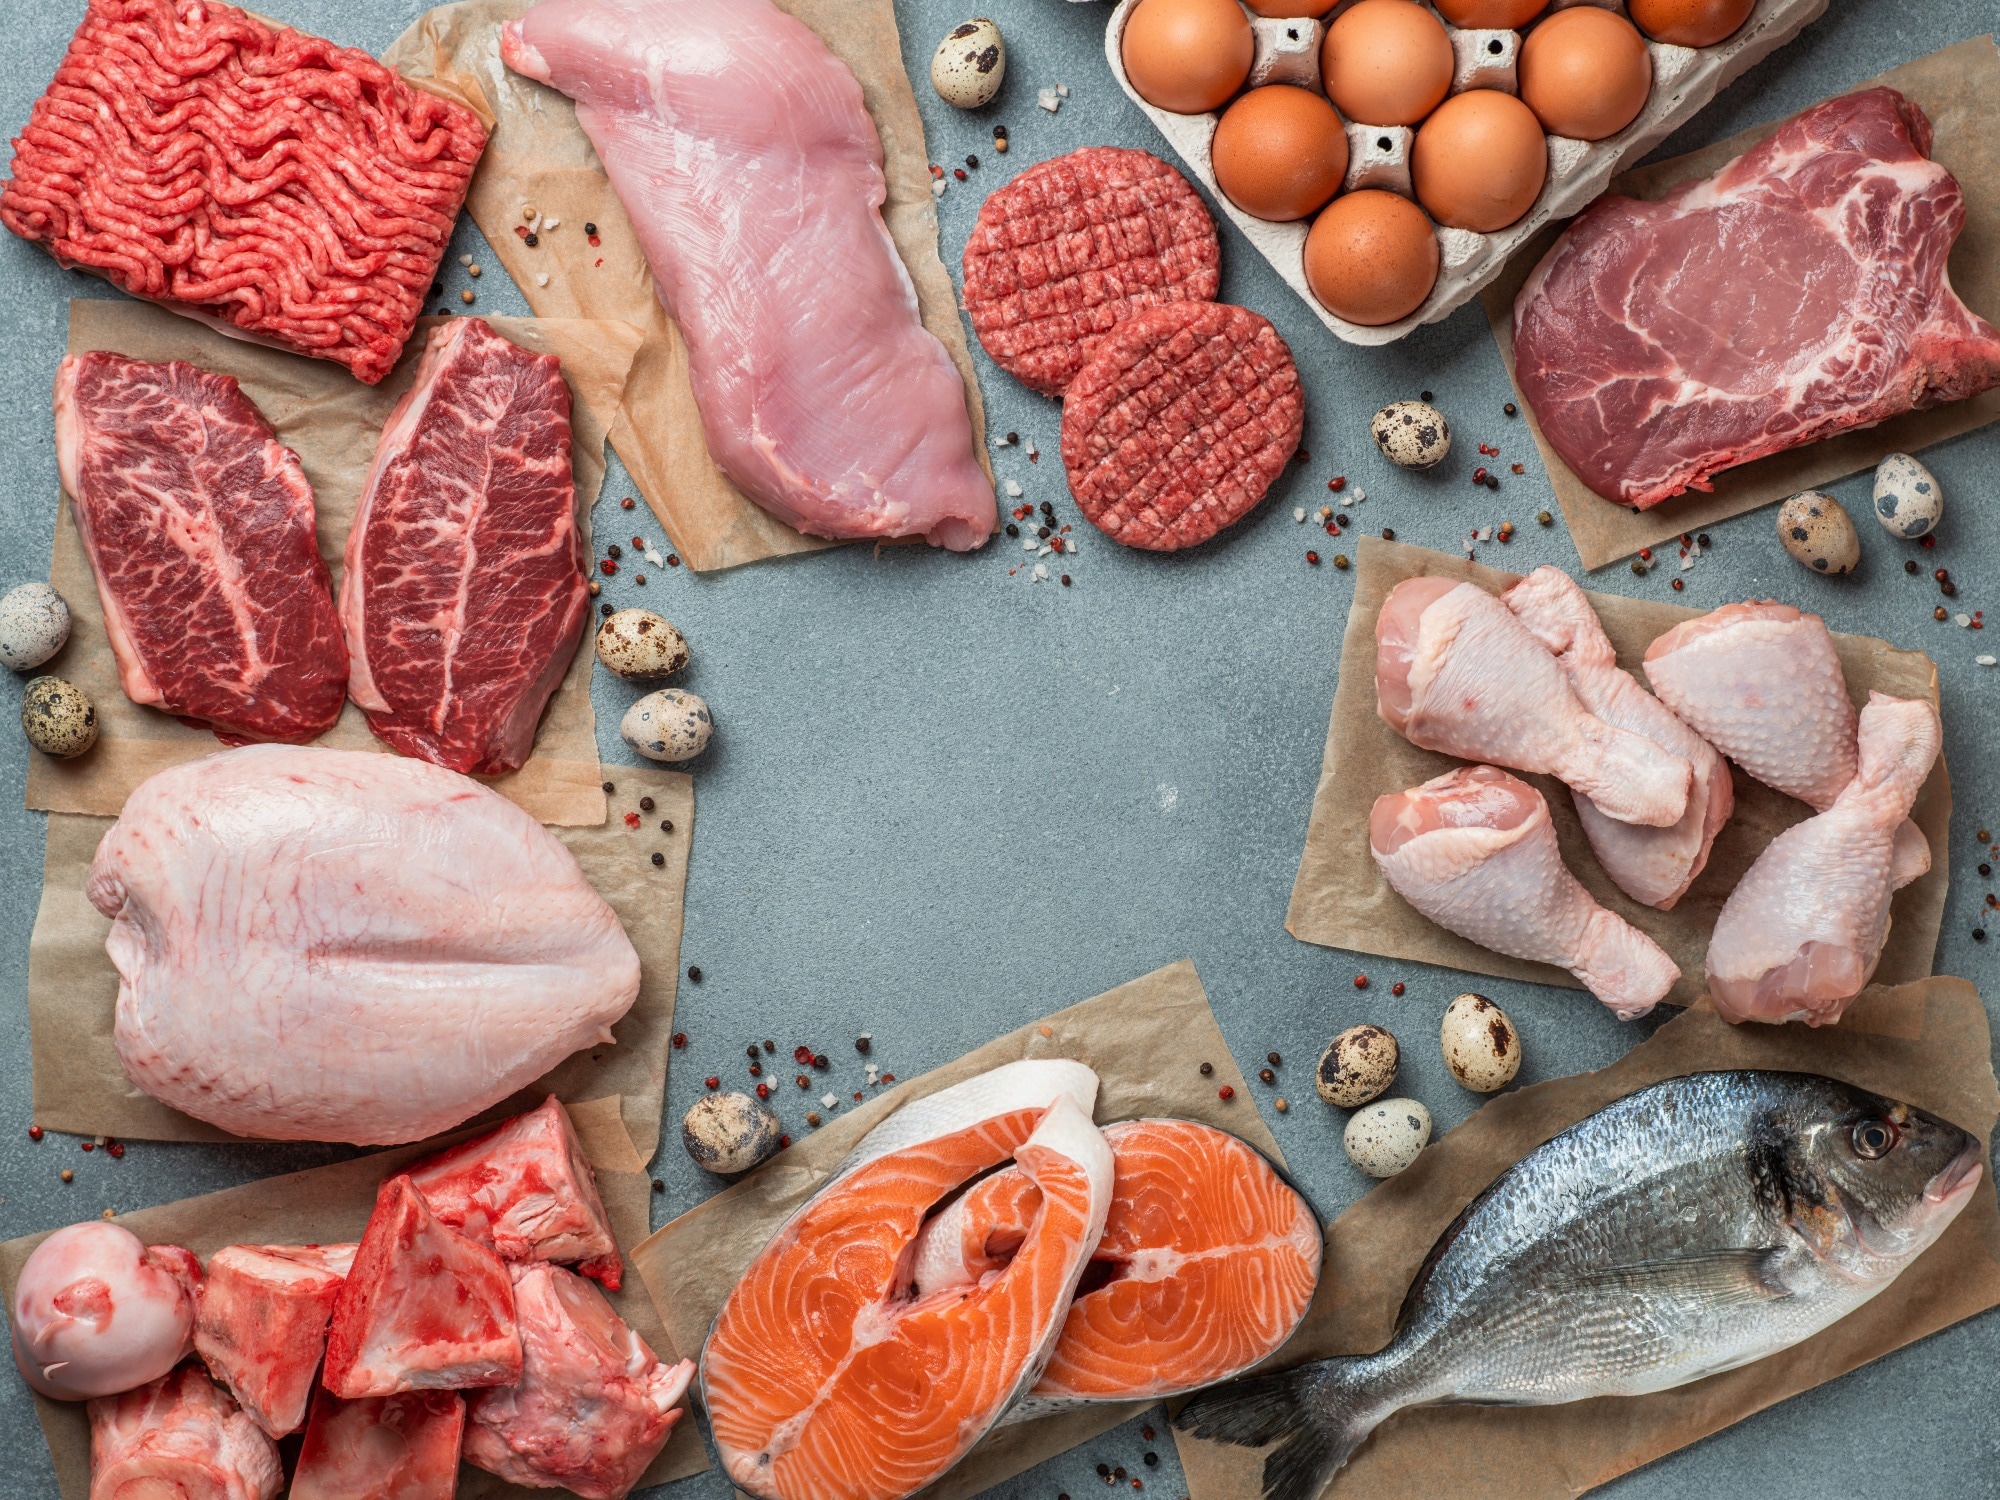 Study: Total meat (flesh) supply may be a significant risk factor for cardiovascular diseases worldwide. Imge Credit: Fascinadora / Shutterstock.com